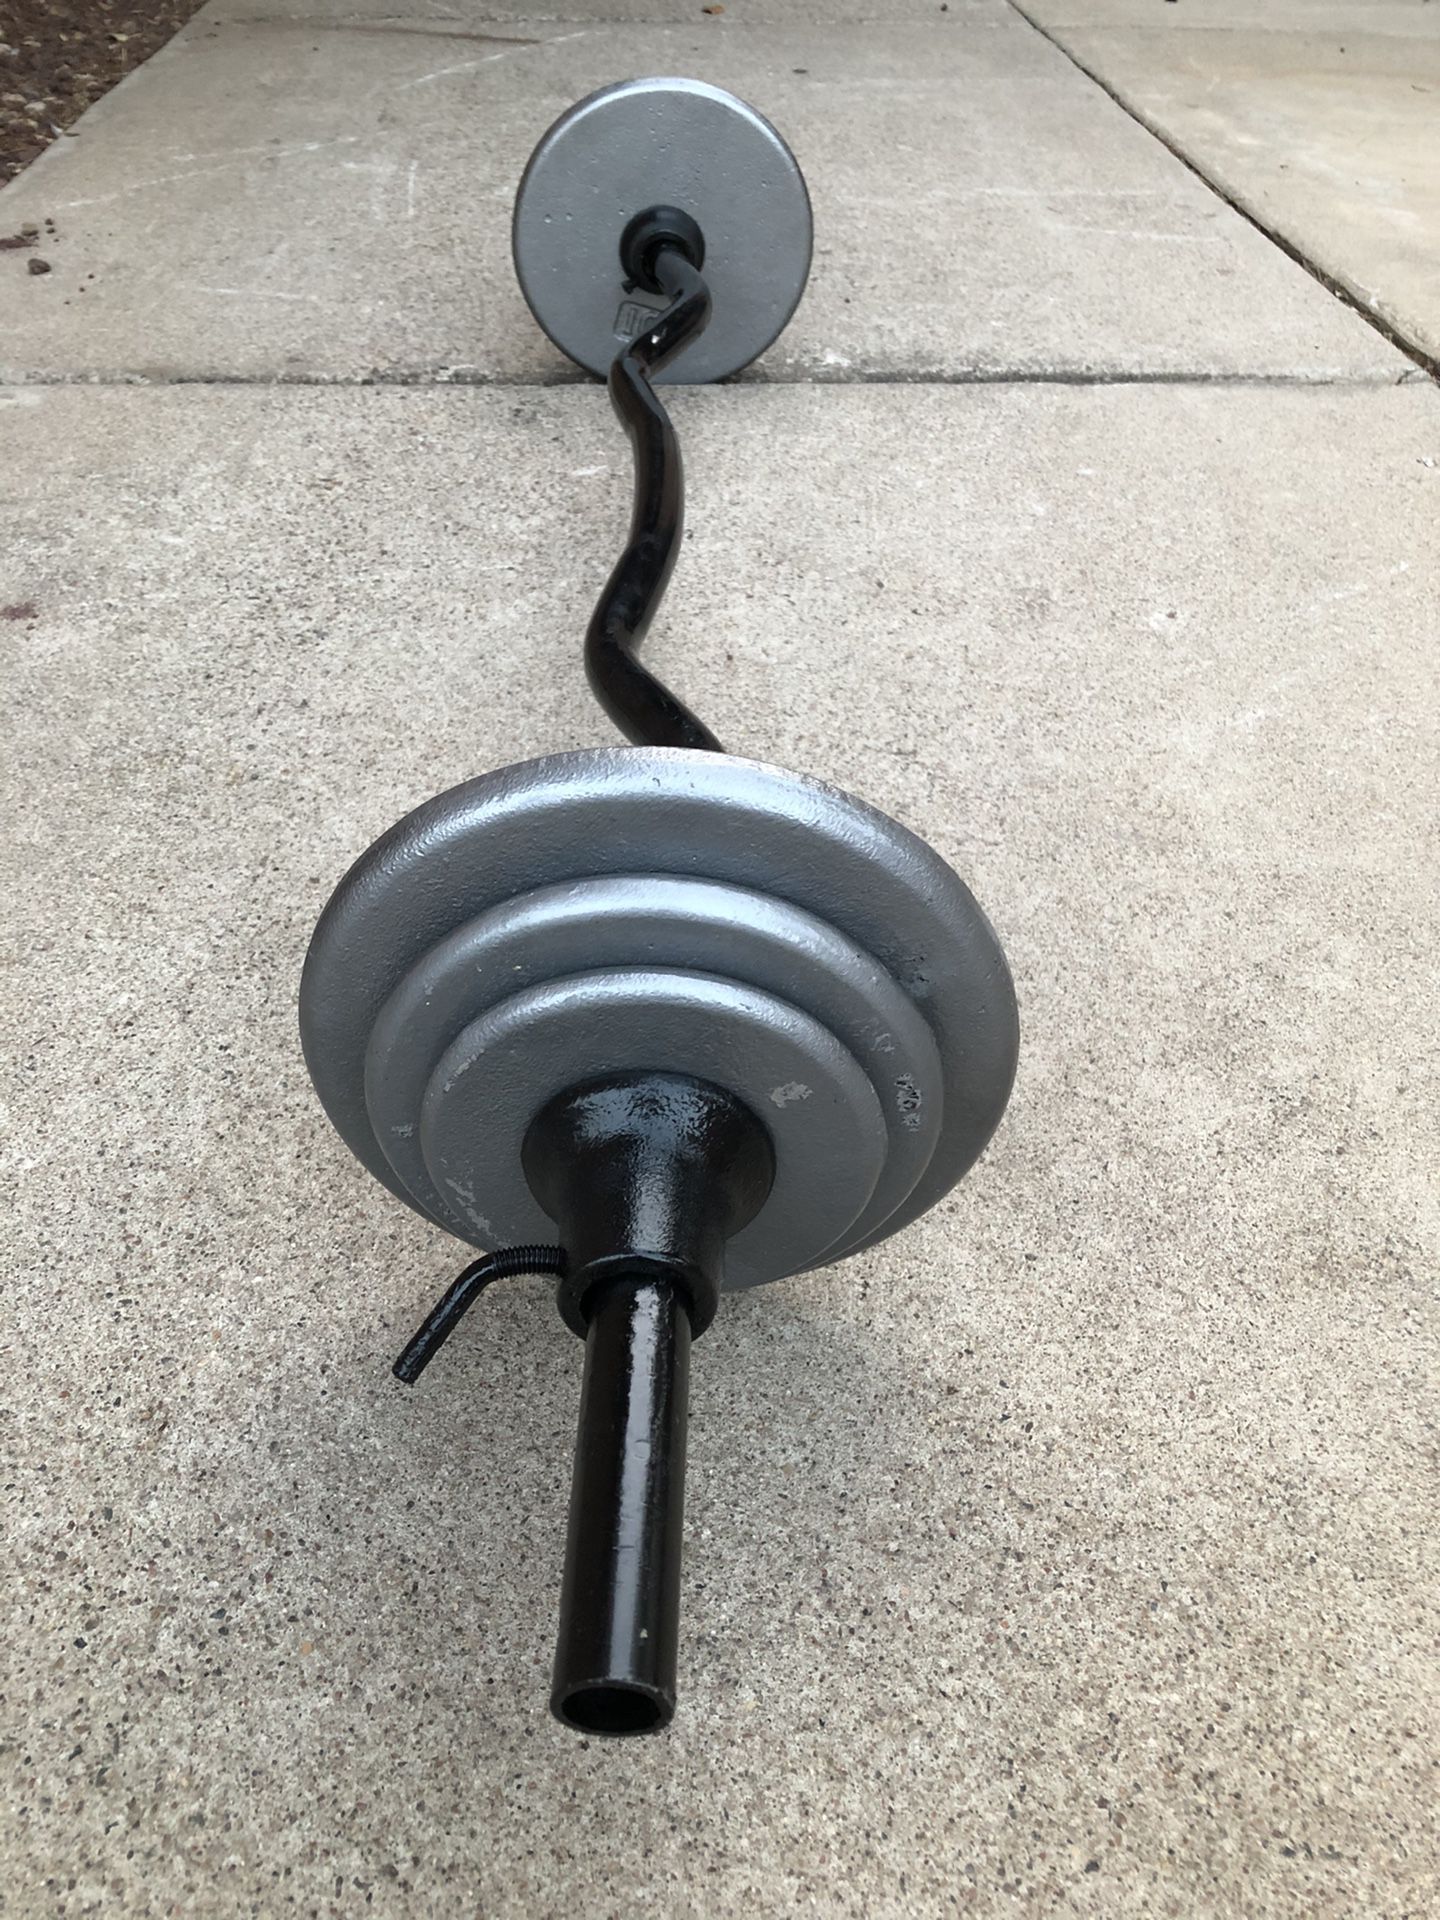 Standard 1 inch Curl bar with weight plates...$135 OBO